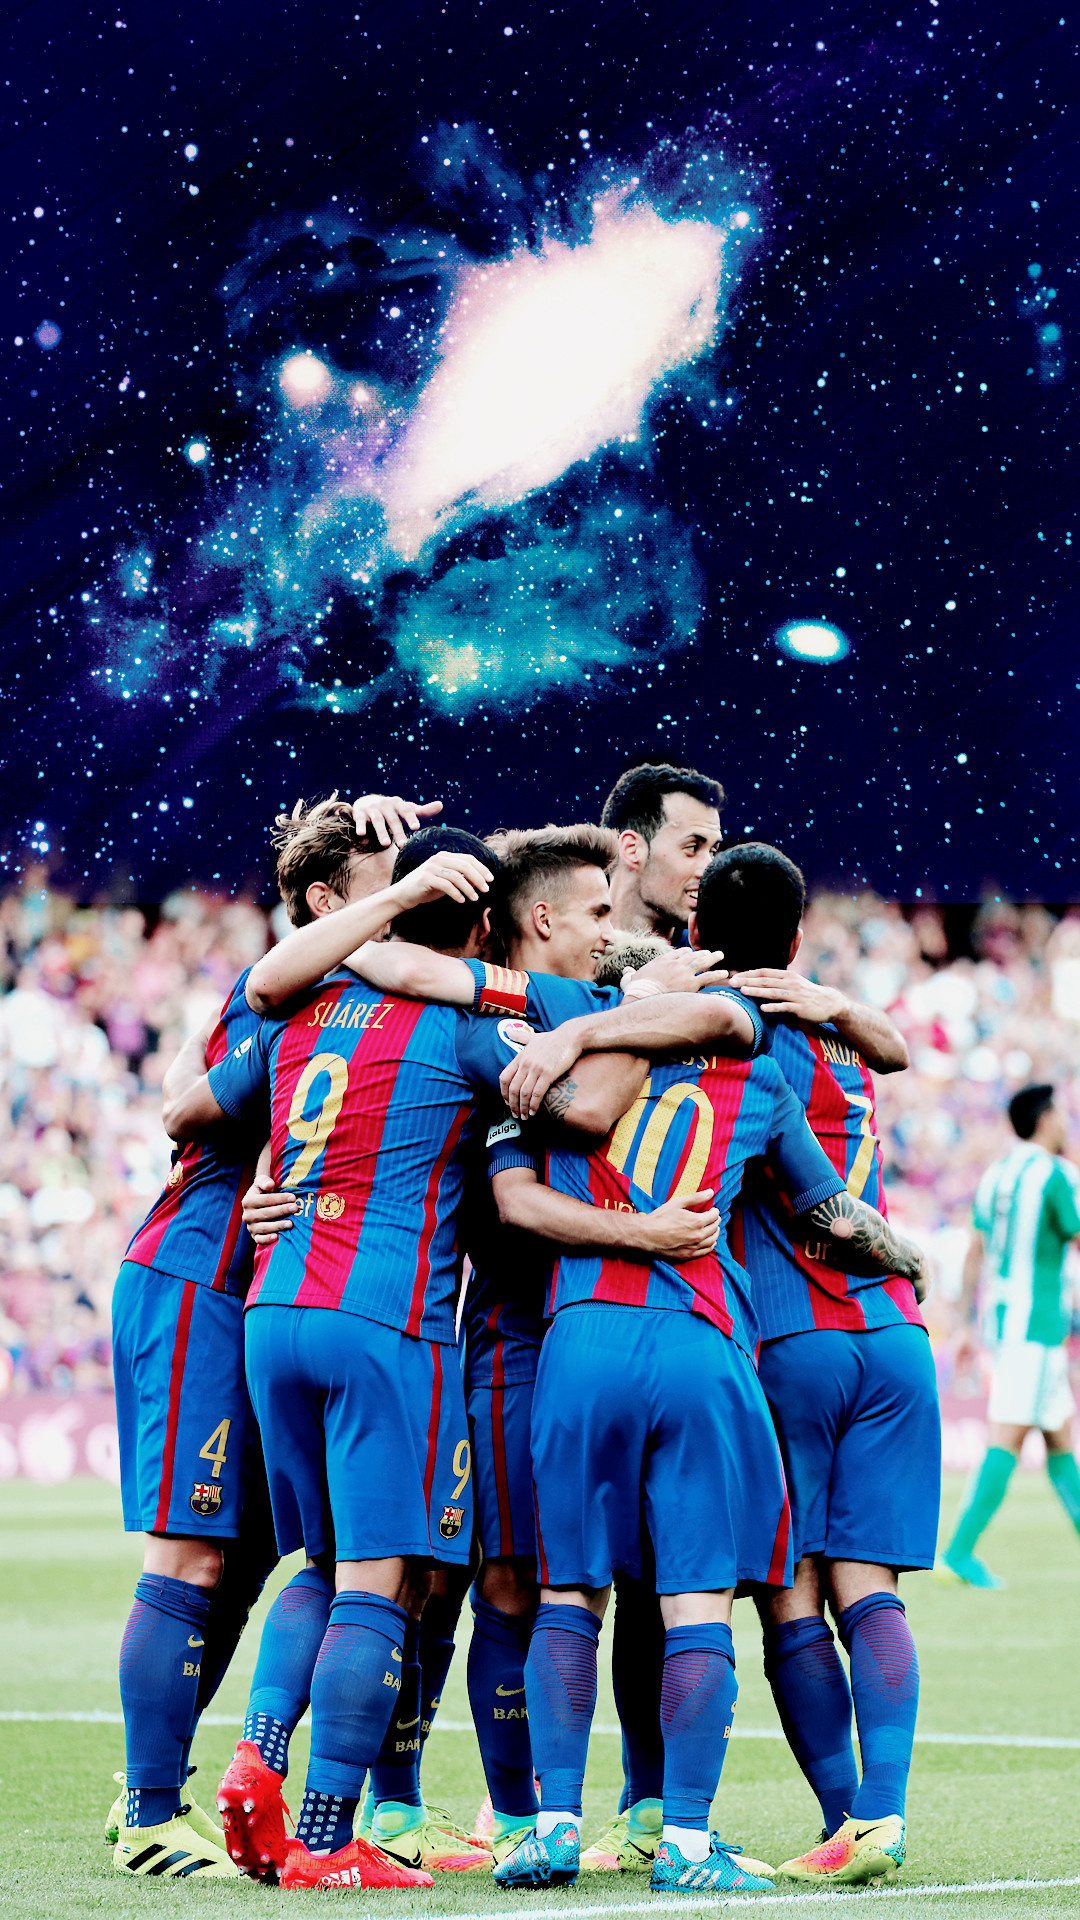 Laliga wallpapers, Expressive images, Football passion, Artistic designs, 1080x1920 Full HD Phone